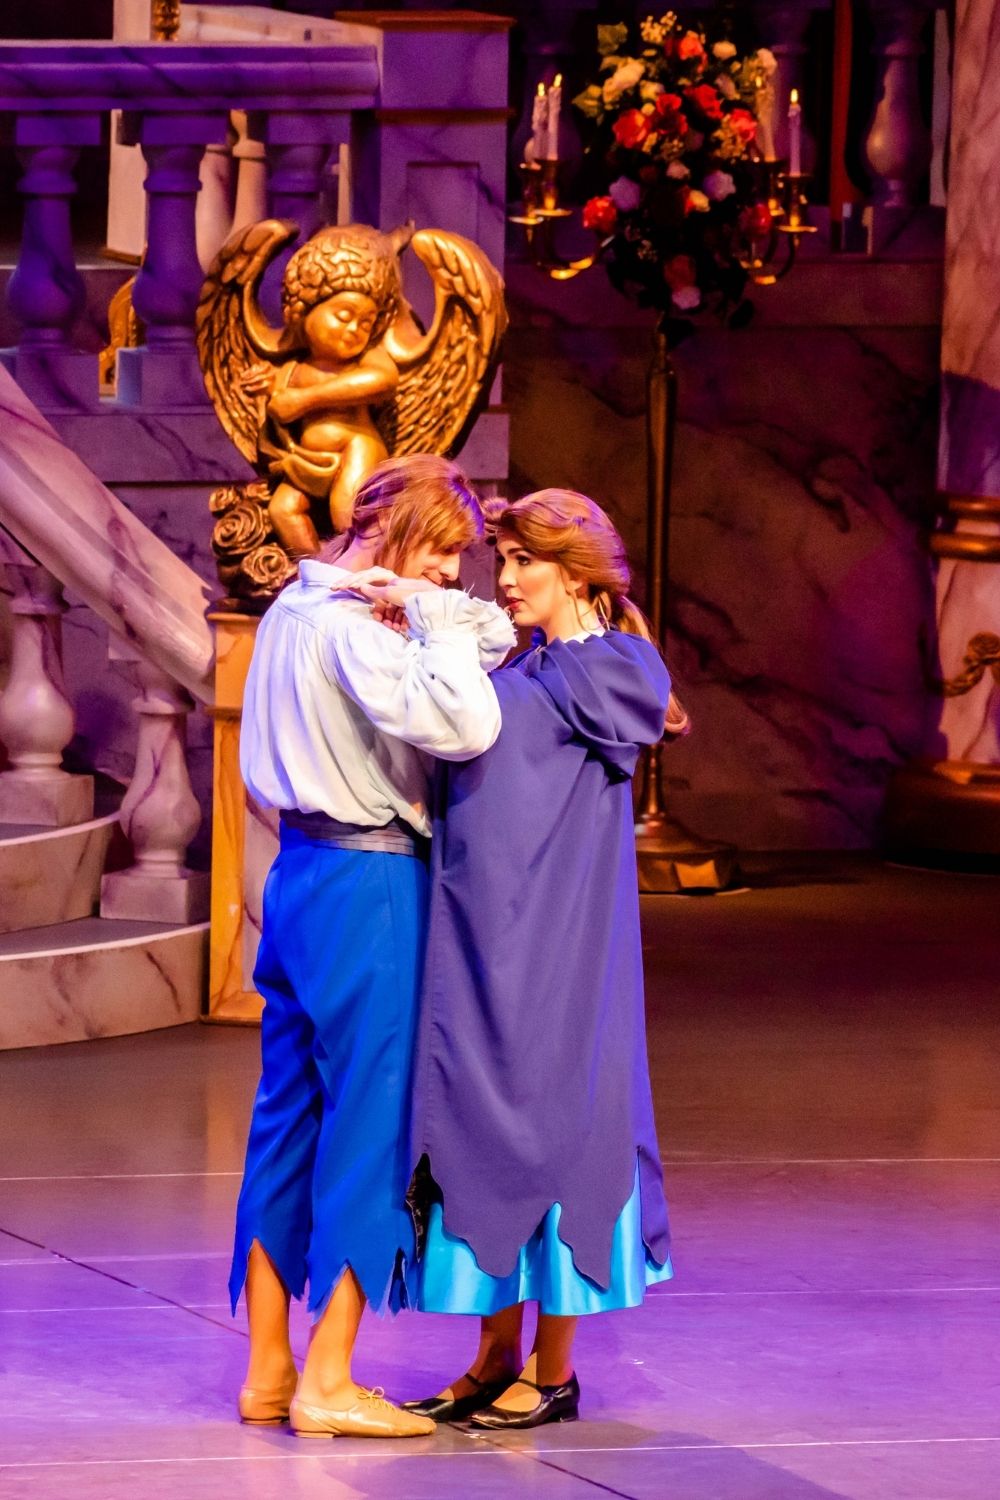 Prince Adam and Belle in the Beauty and the Beast stage show at Hollywood Studios